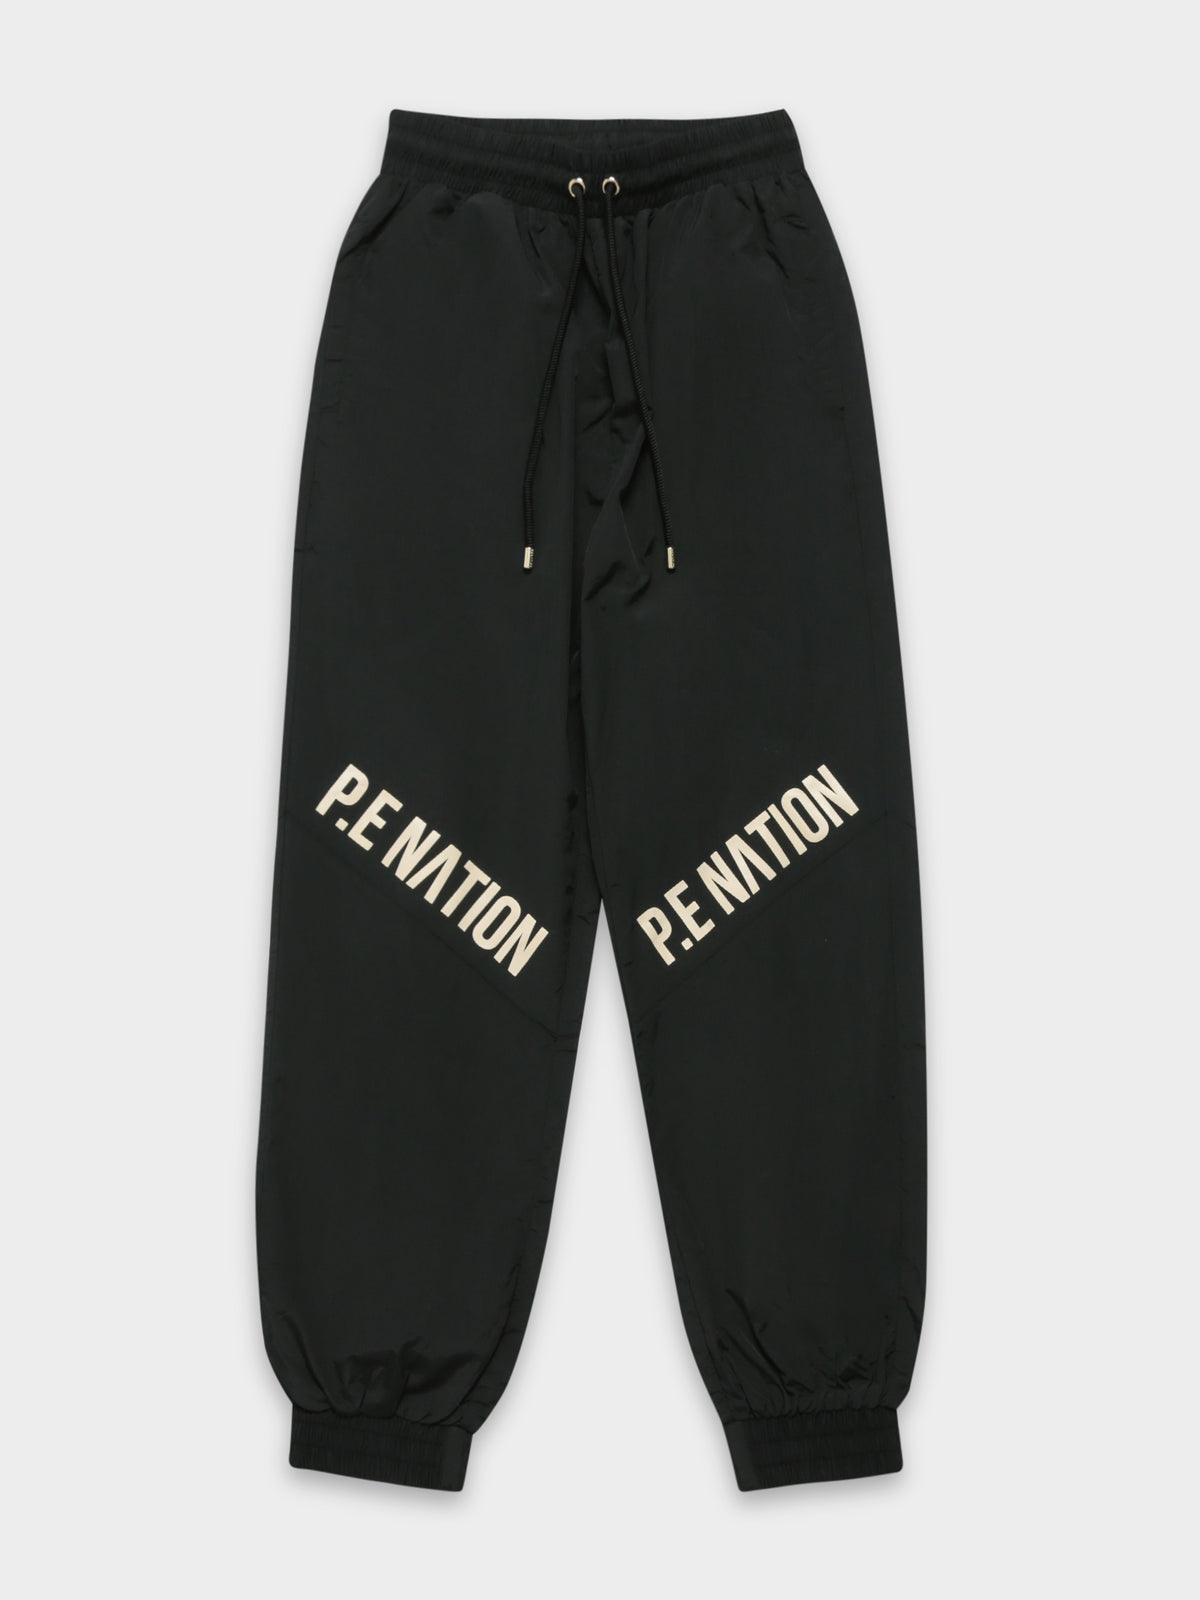 Alliance Trackpants in Black